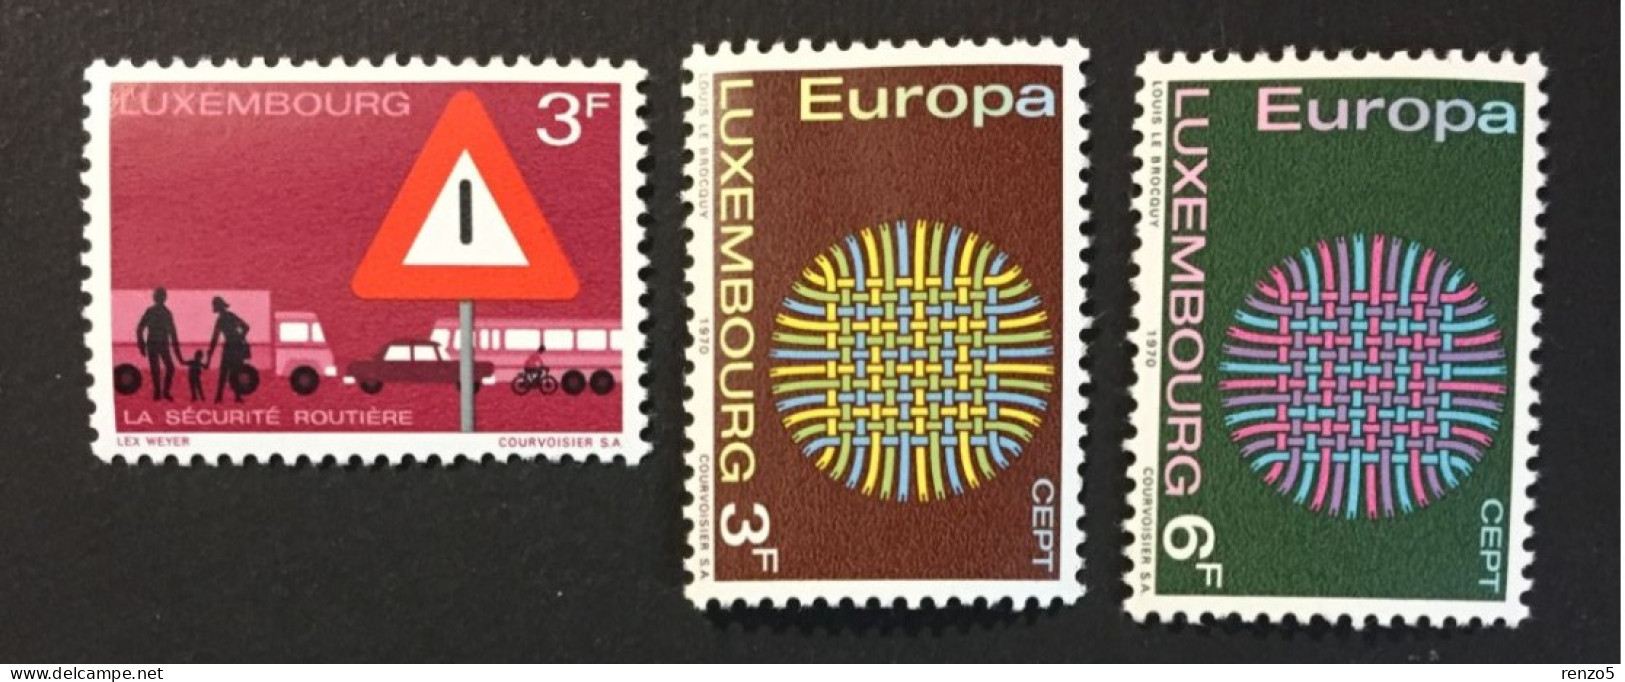 1970 Luxembourg -The Importance Of Traffic Safety, Europa CEPT - Unused - Ongebruikt